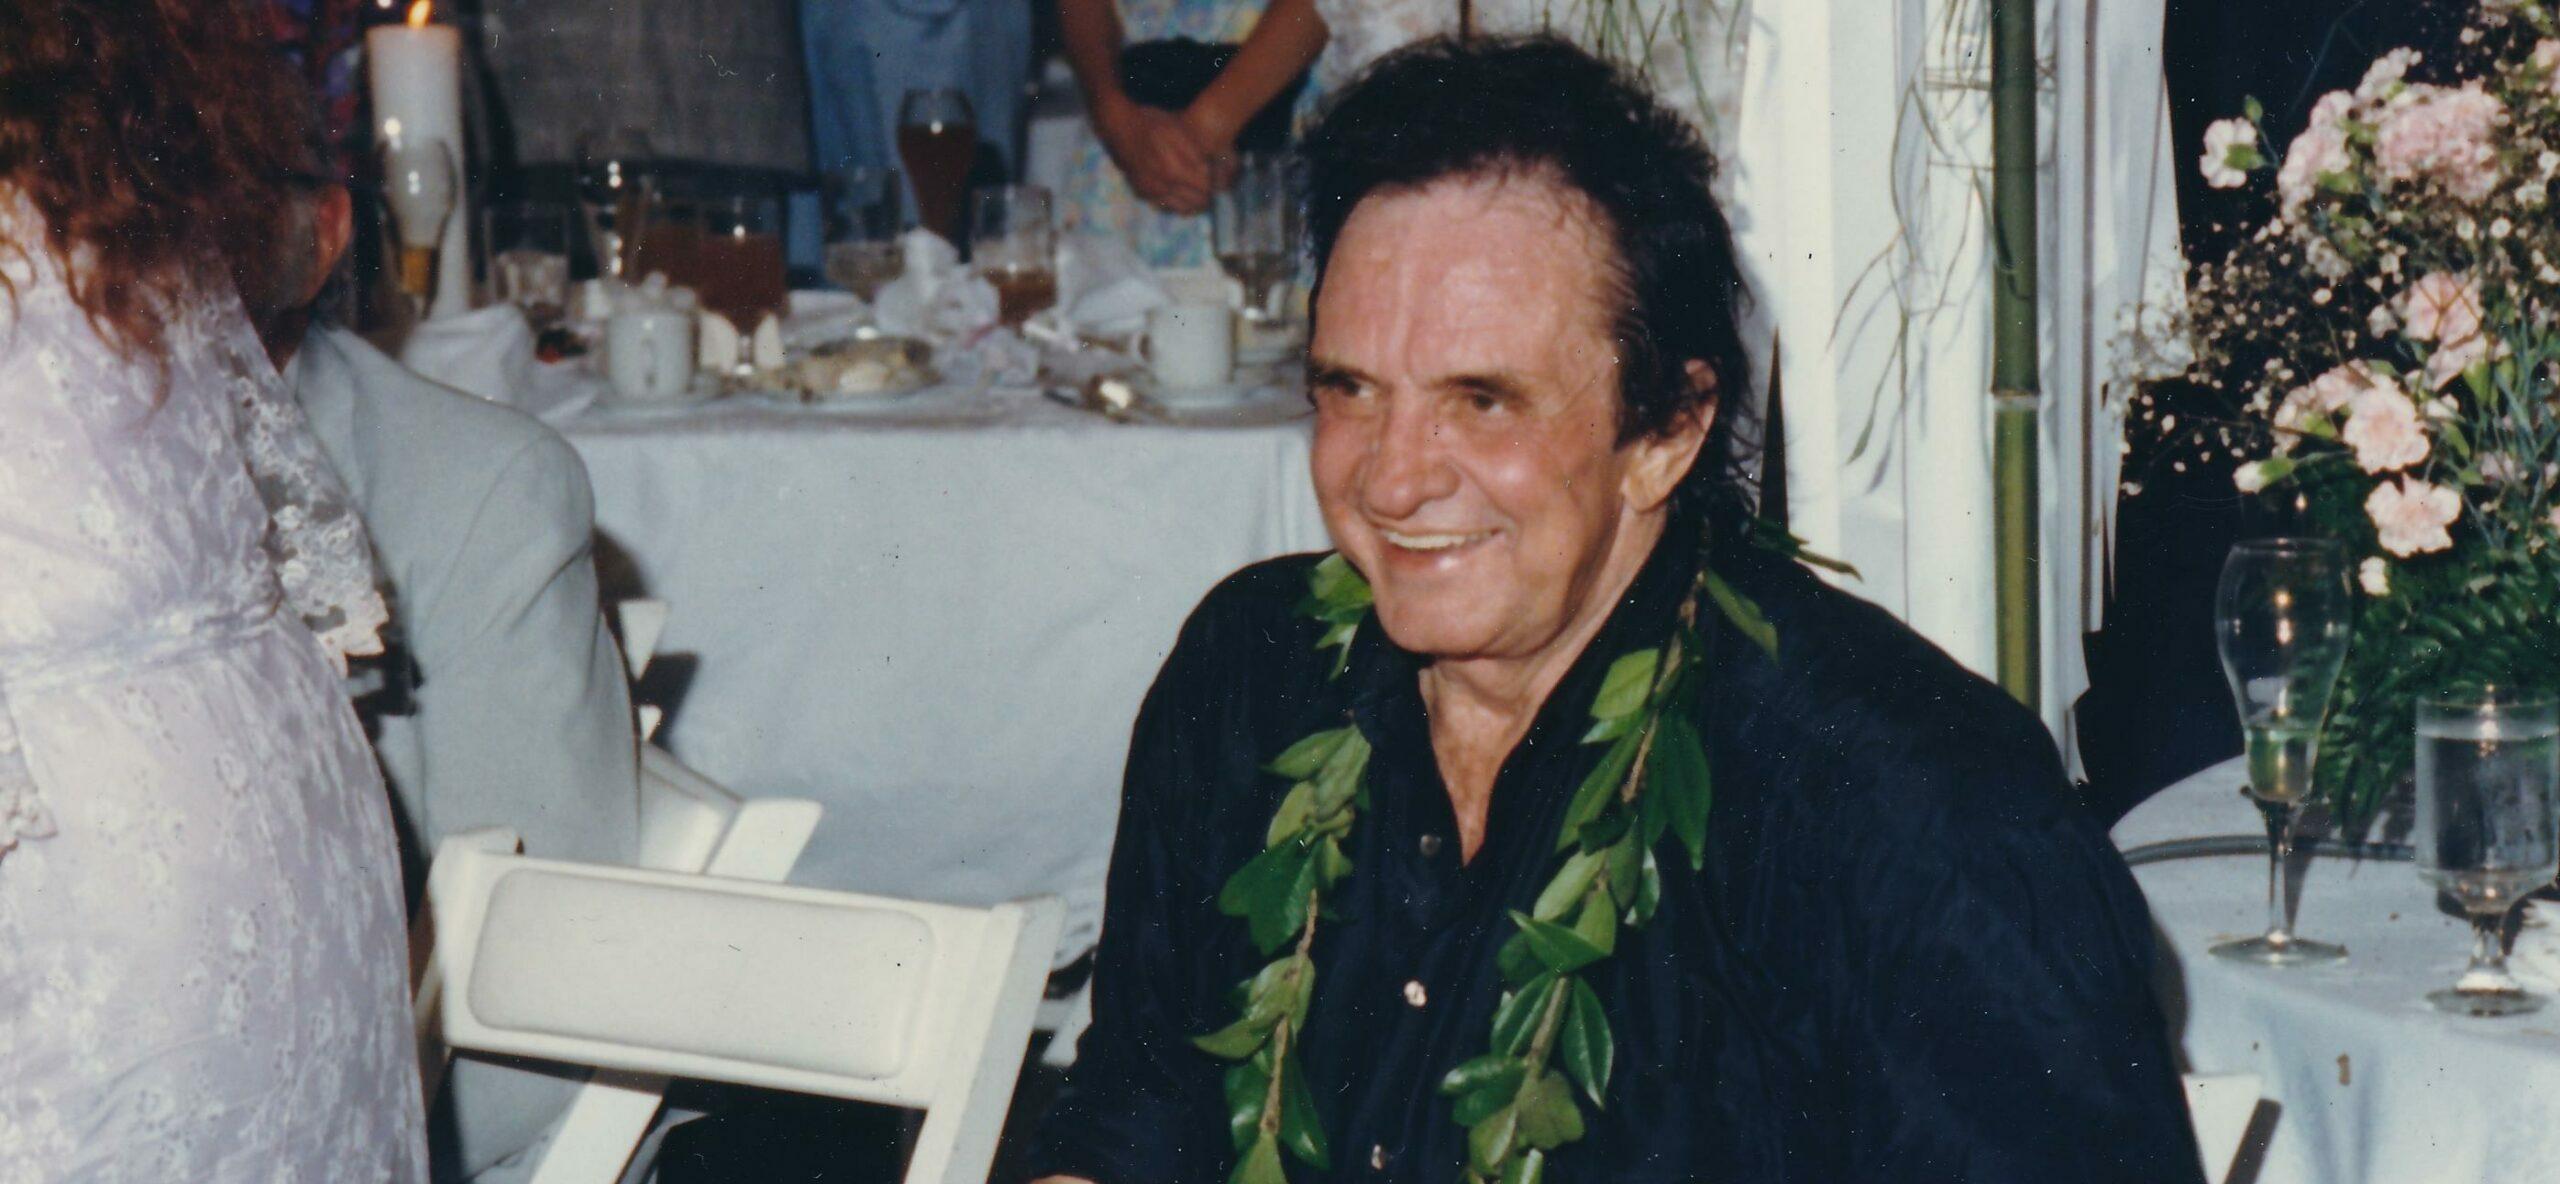 Johnny Cash at his daughters wedding in the early 1990s.